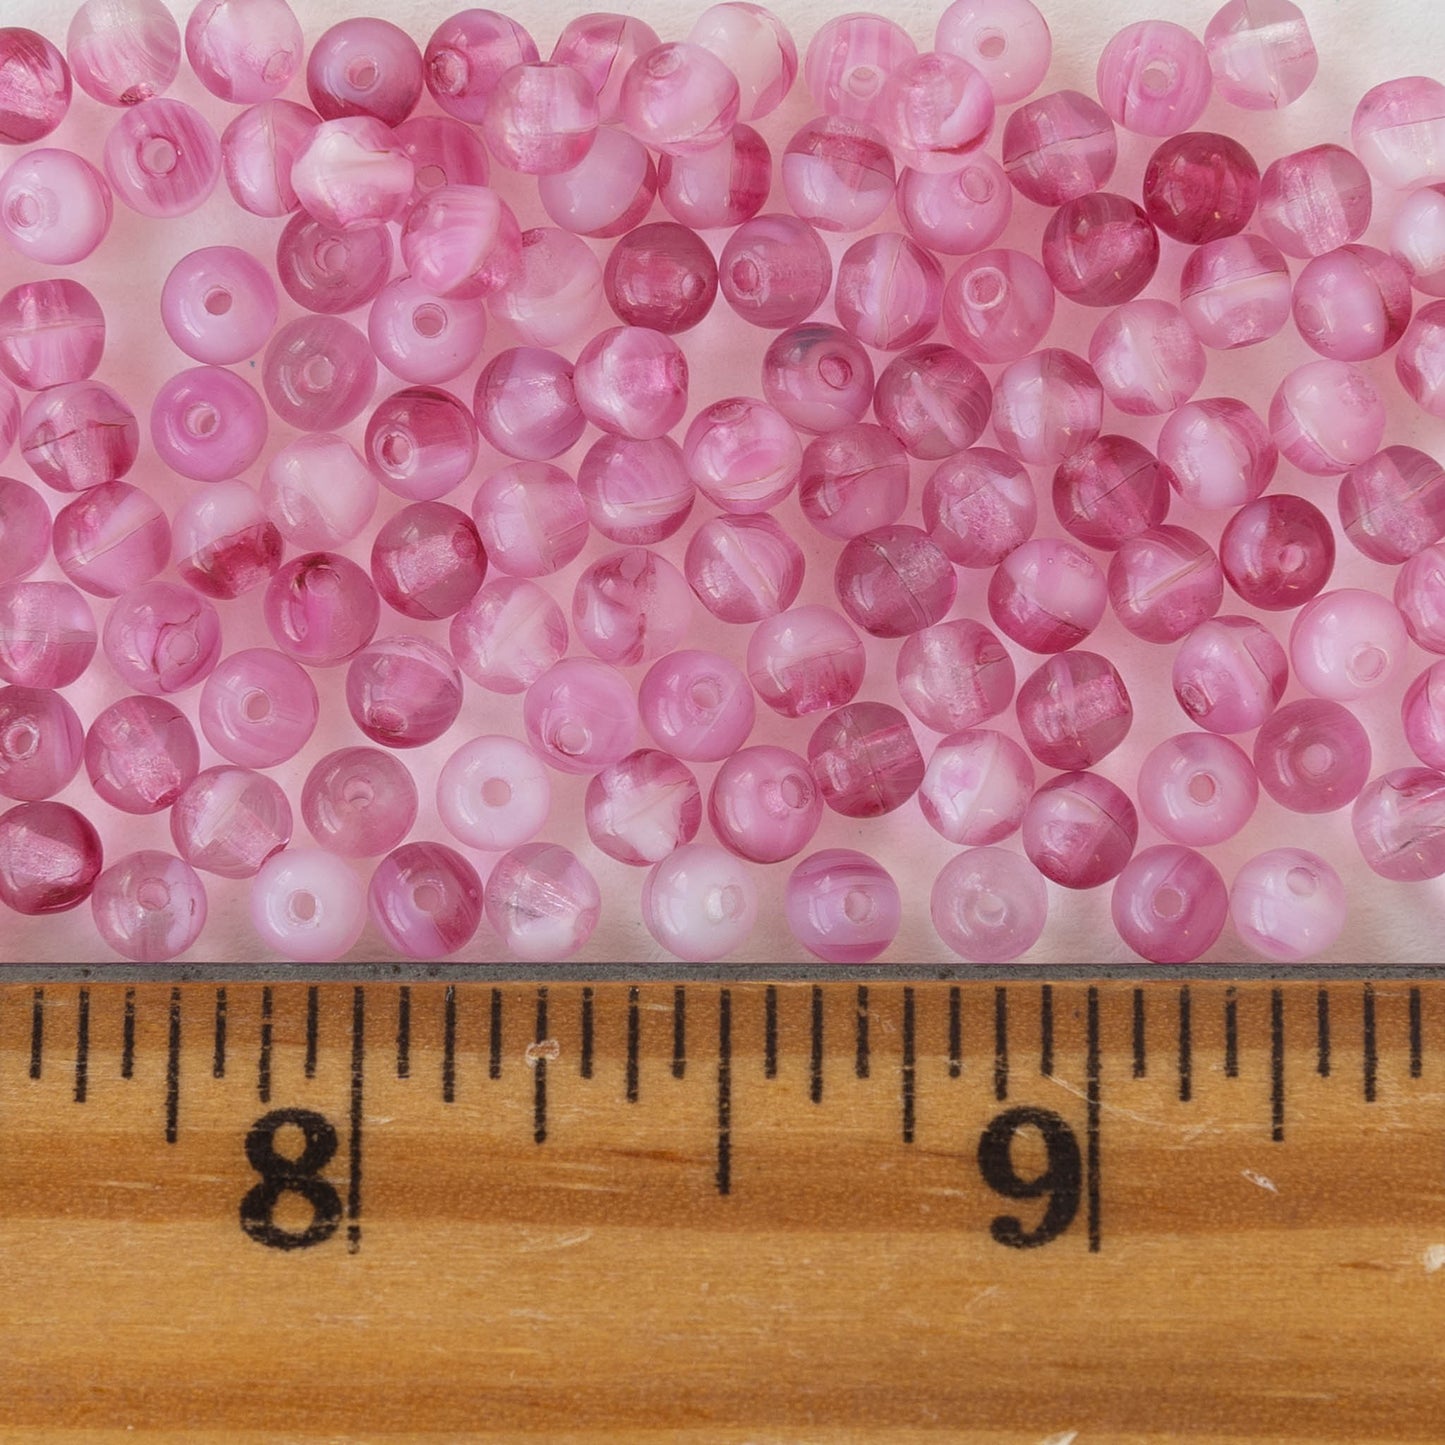 4mm Round Glass Beads - Pink Crystal Mix - 100 Beads